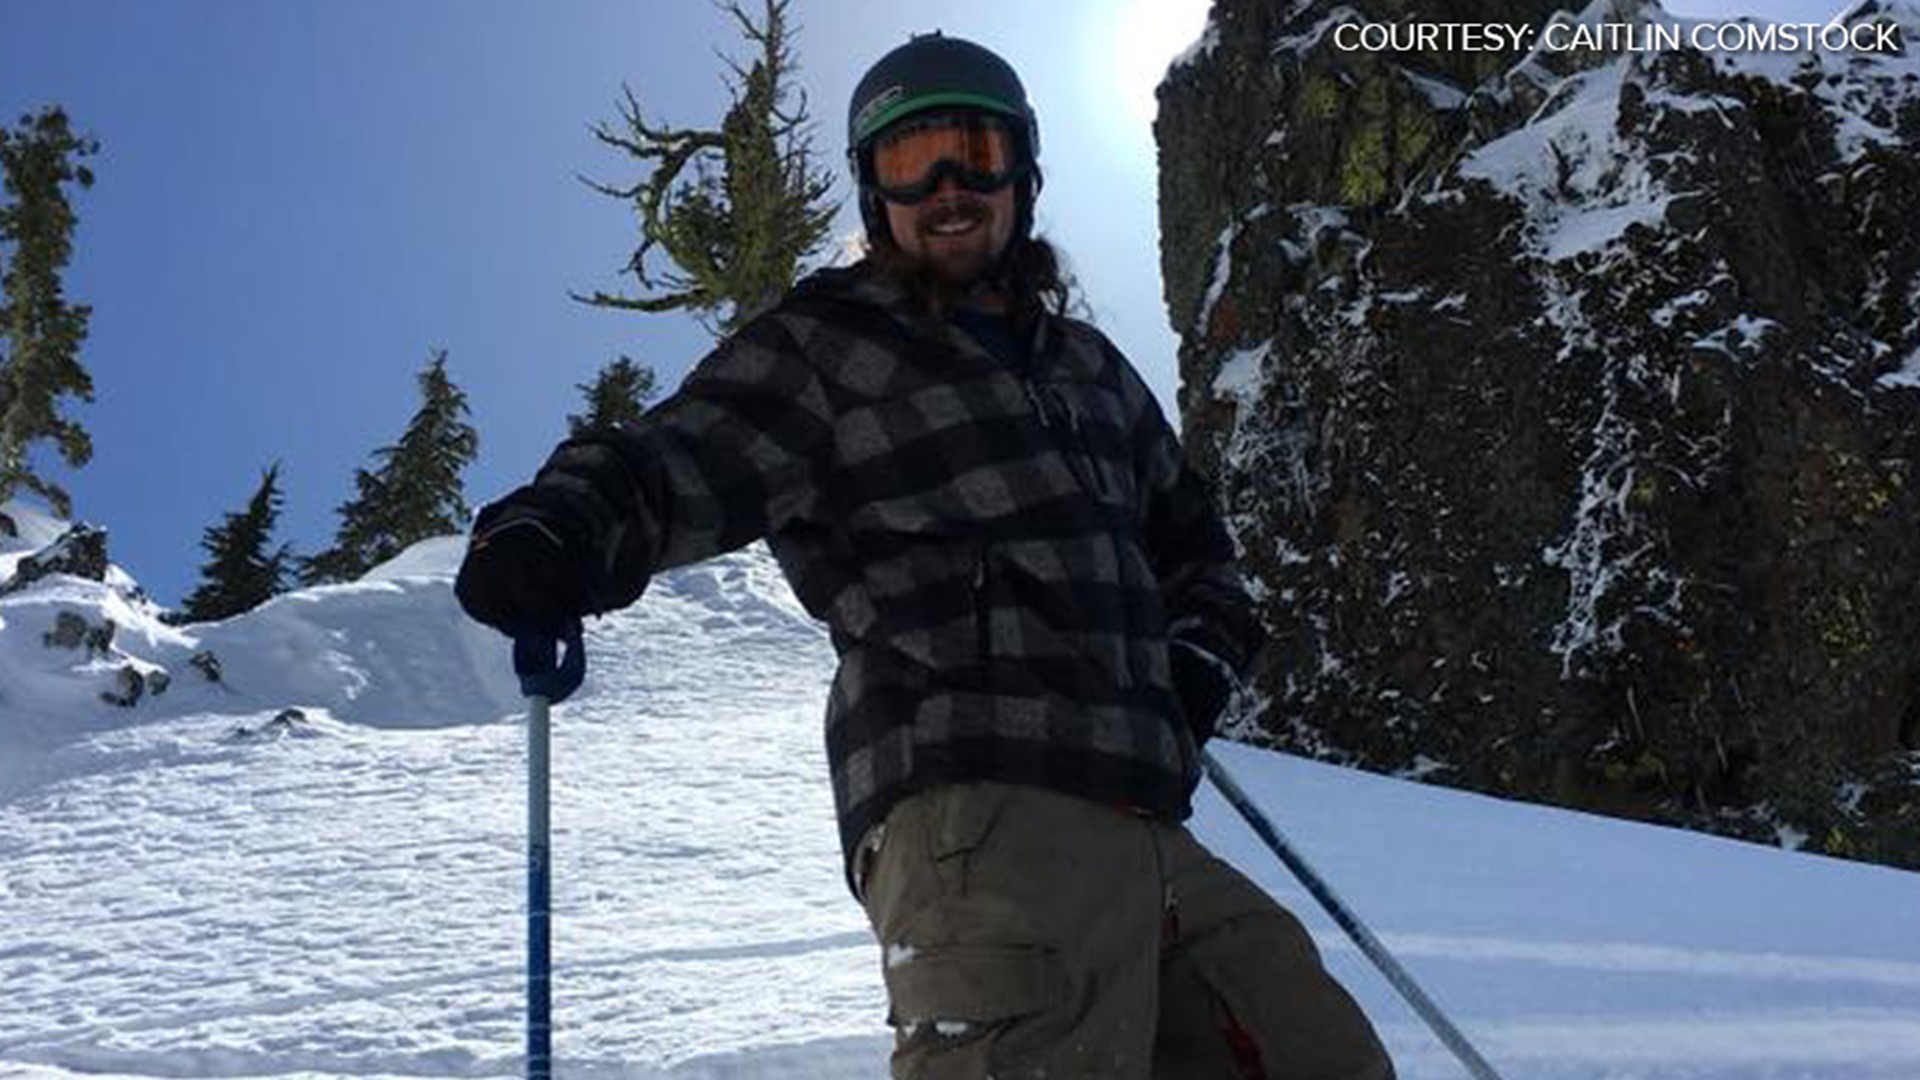 Multiple avalanches in less than 1 week at Lake Tahoe serve as